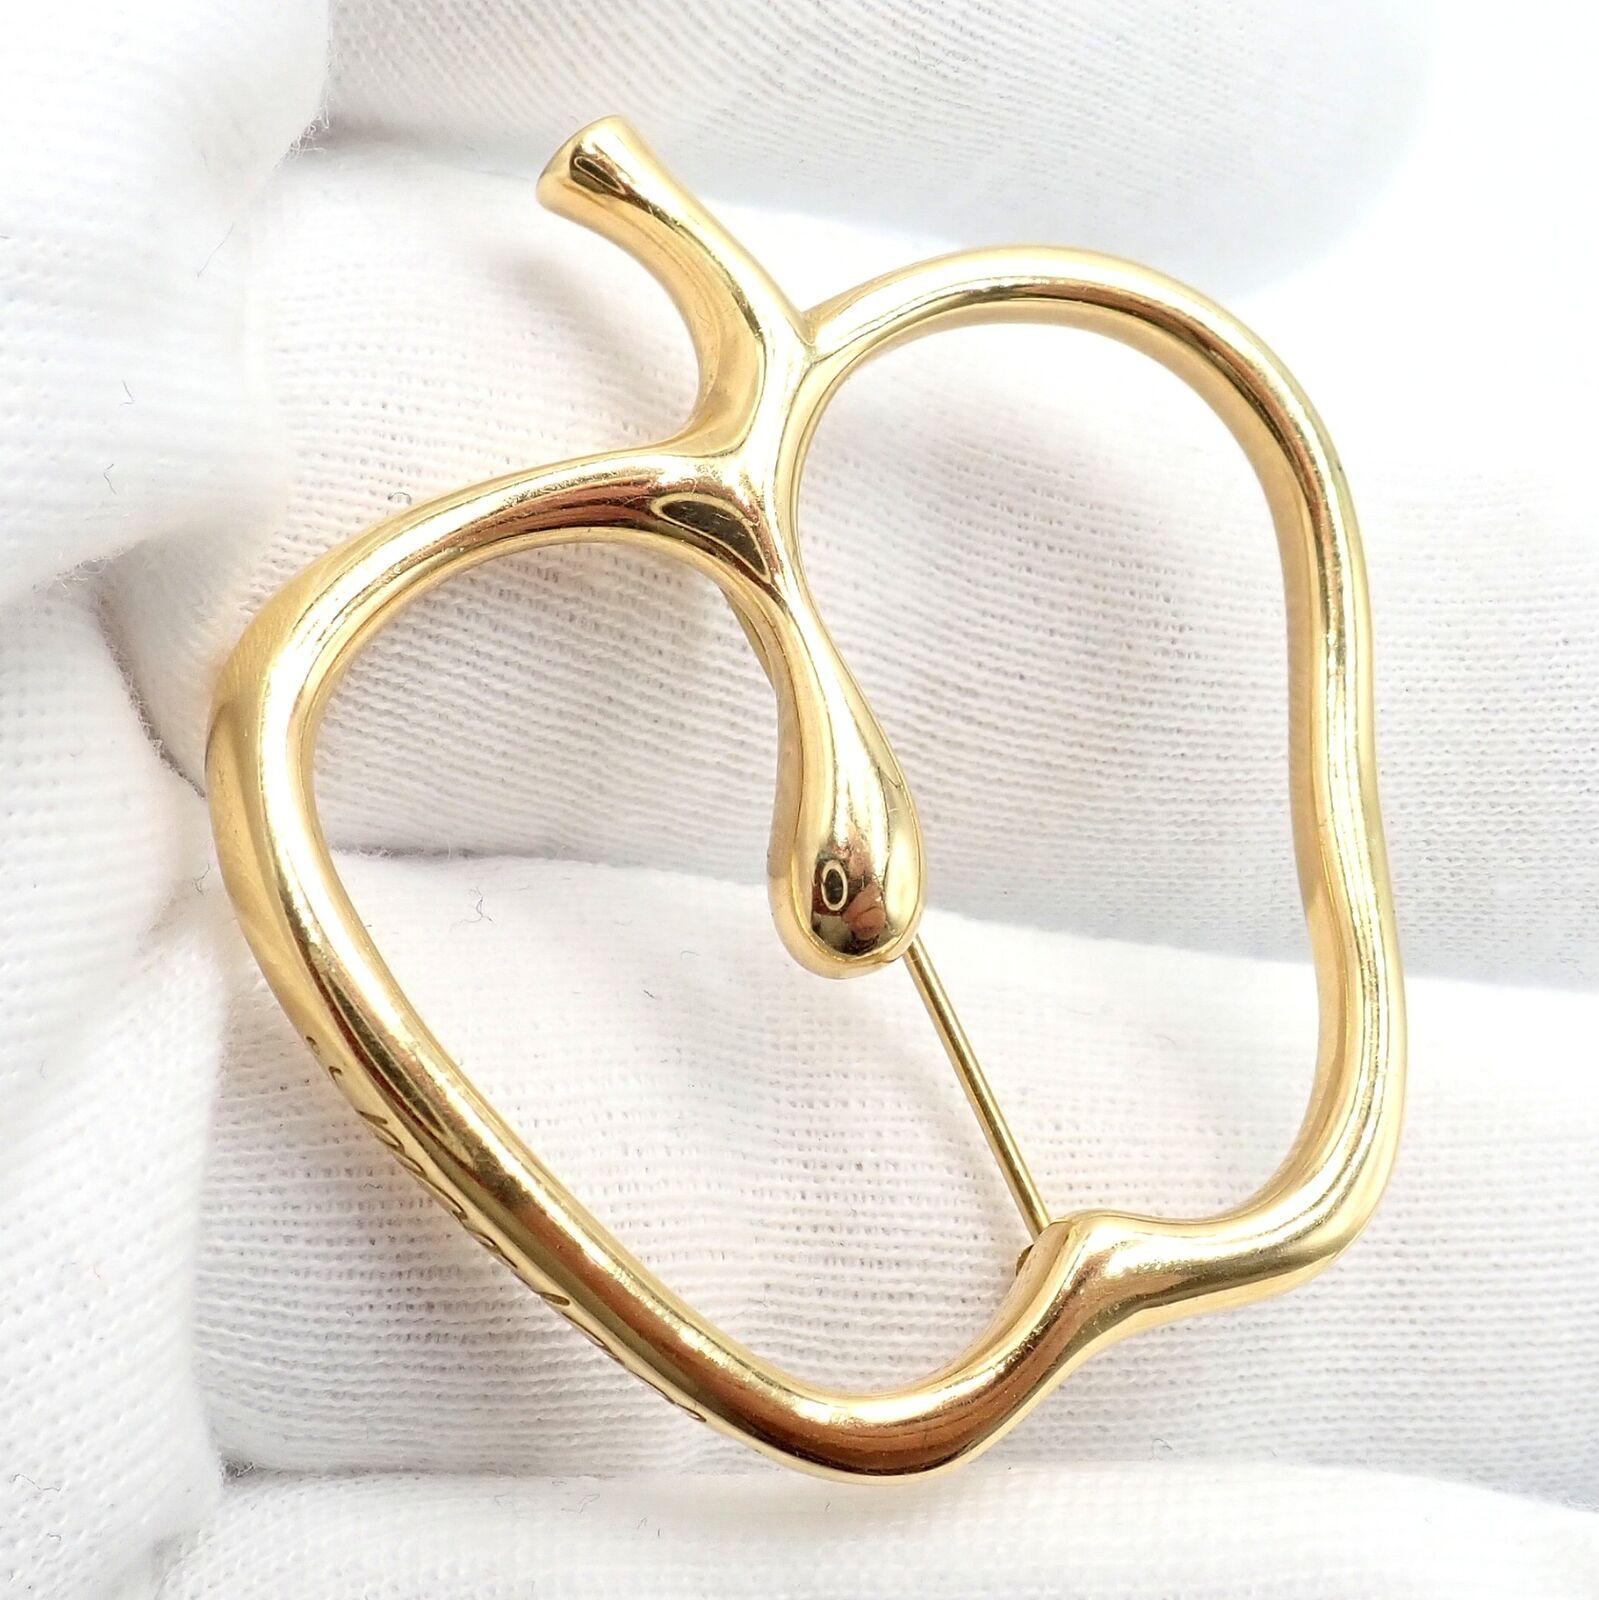 Vintage Tiffany & Co Elsa Peretti Large Apple Yellow Gold Pin Brooch In Excellent Condition For Sale In Holland, PA